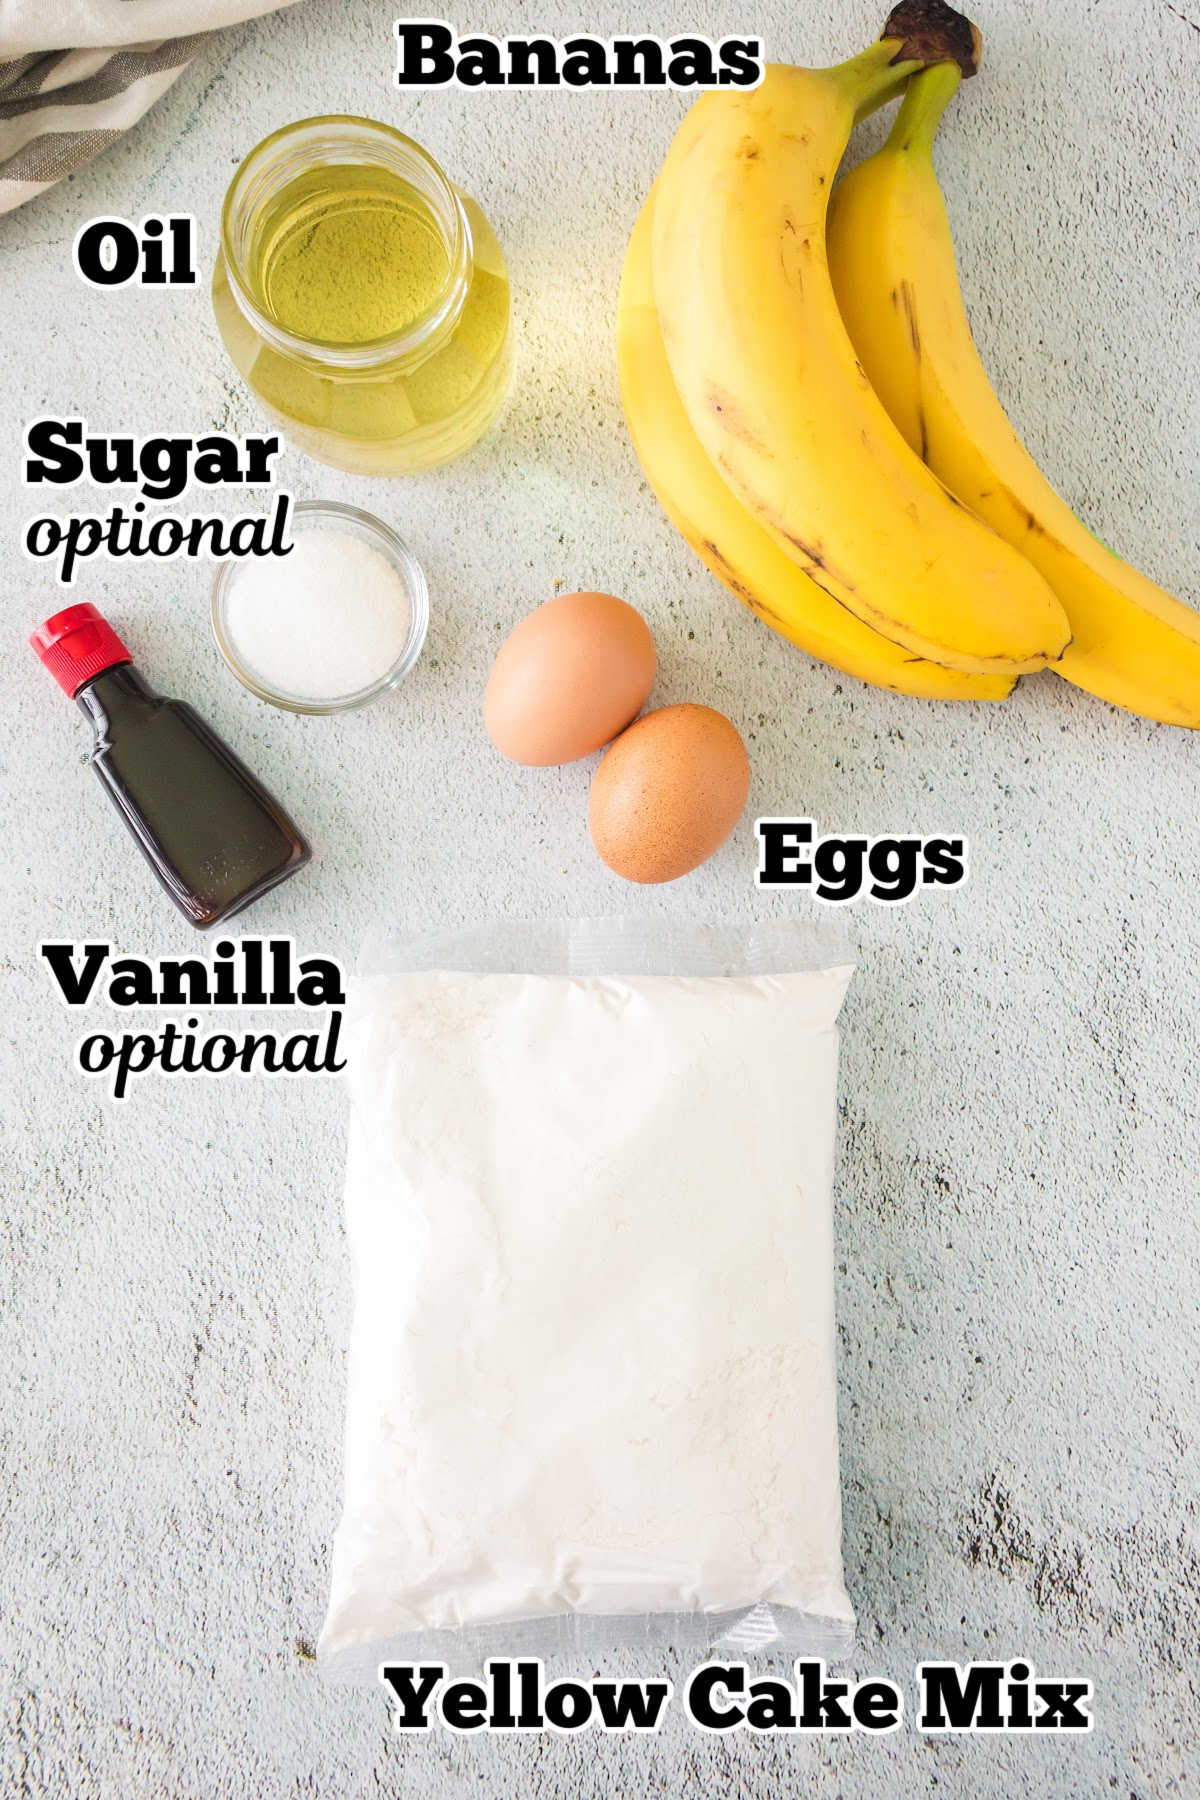 Labeled ingredients for this banana bread recipe on a white background.